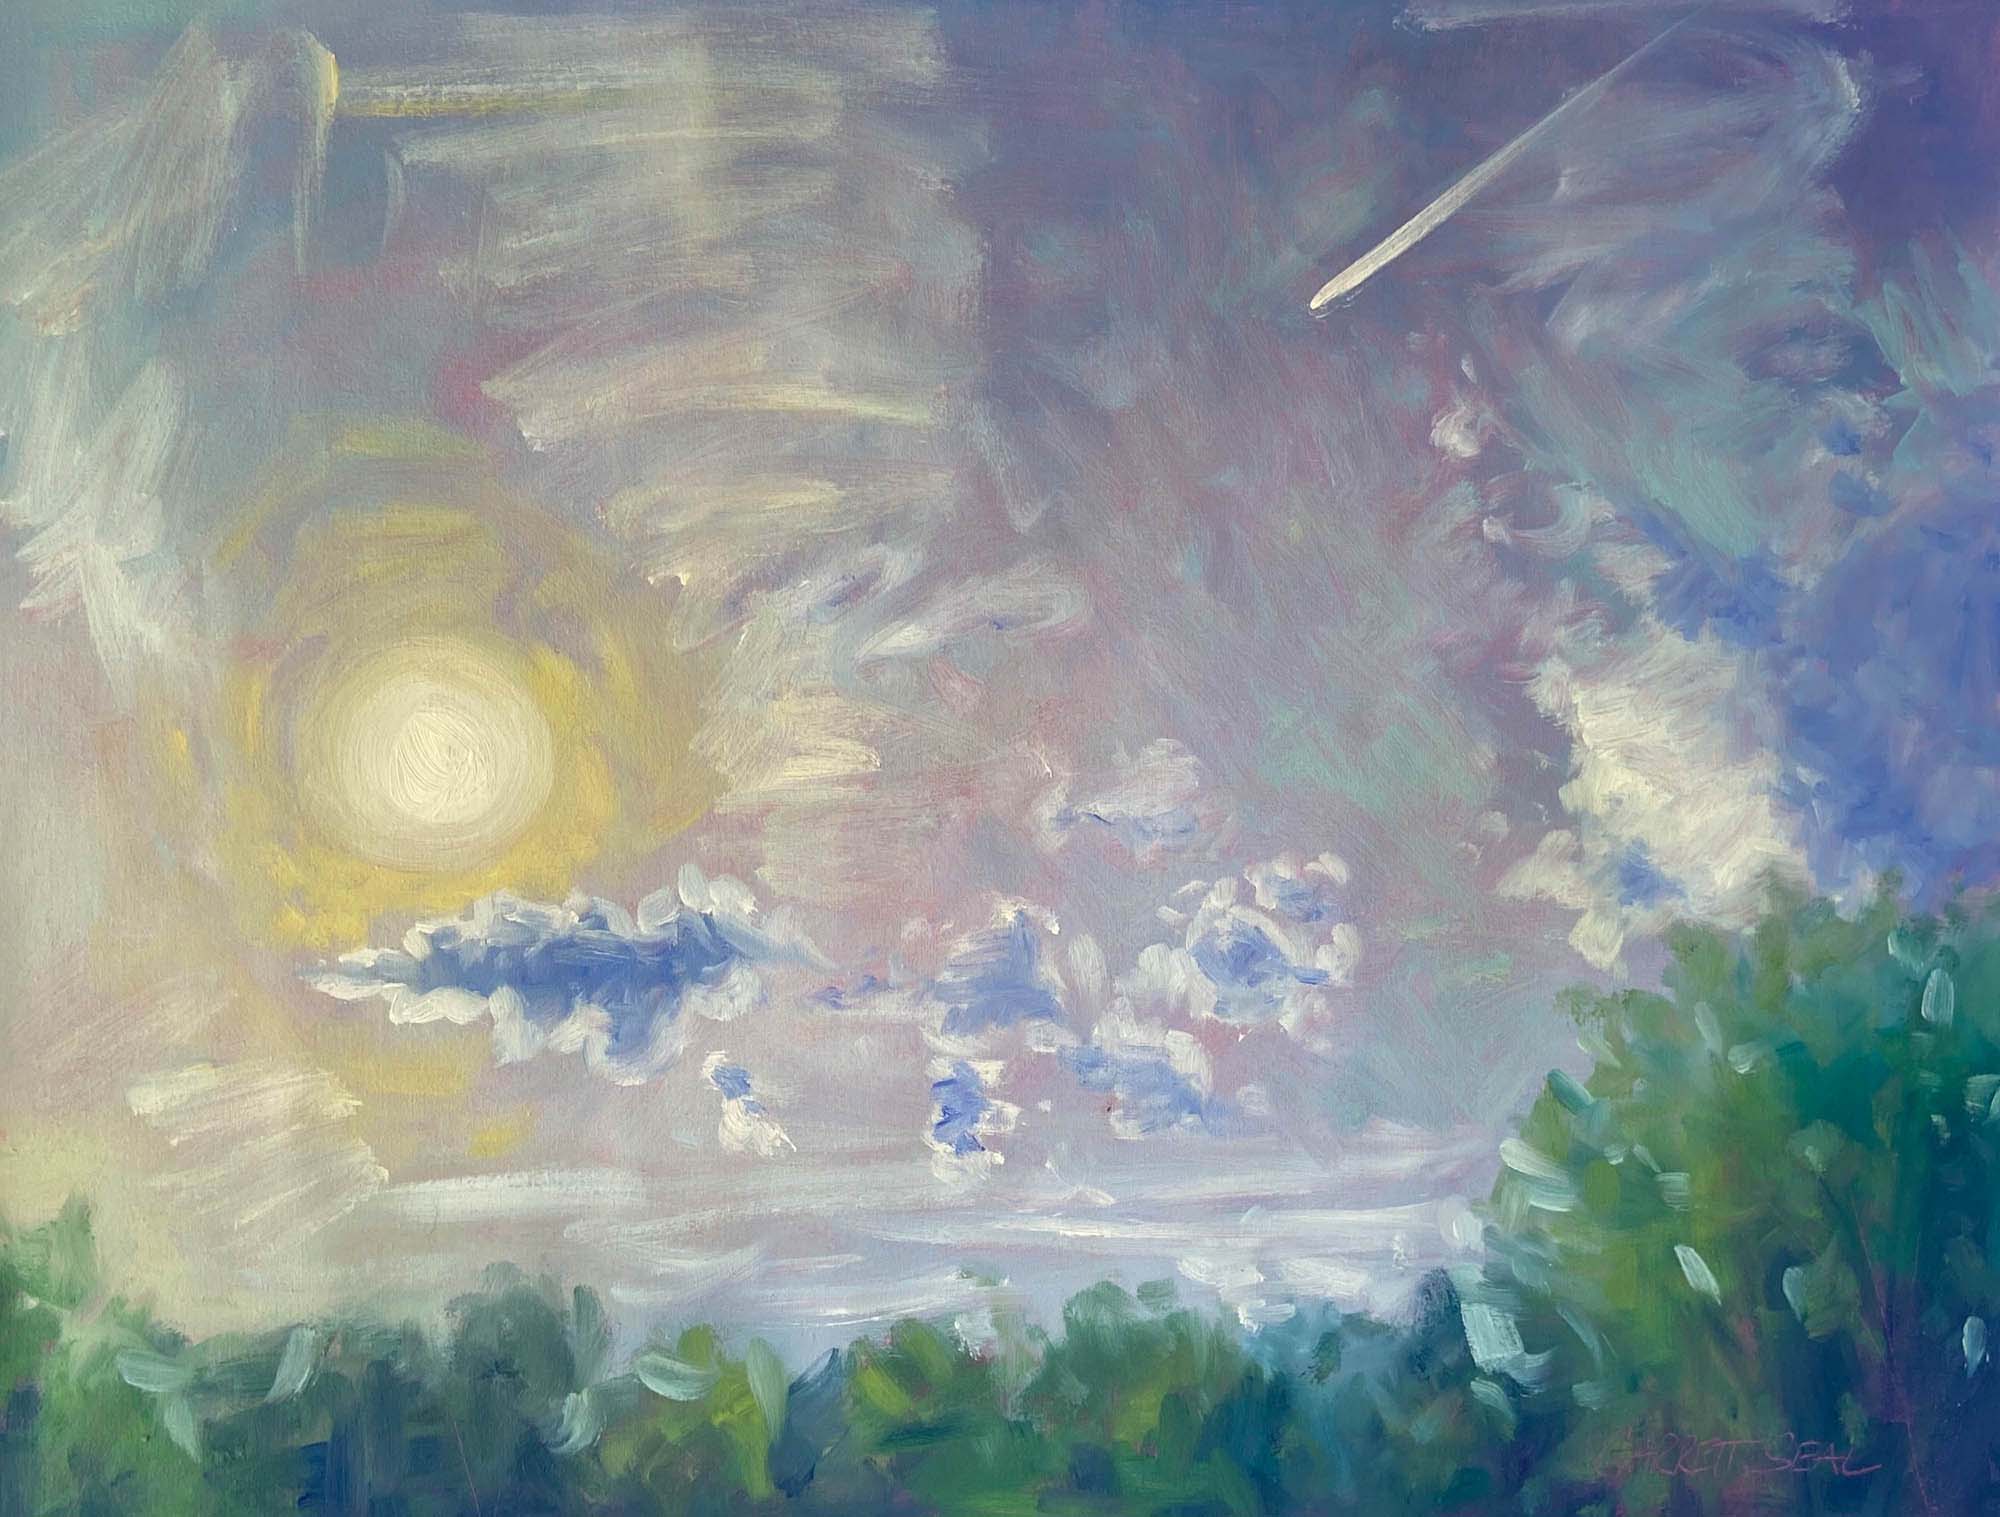 Expressive paint application, swirls of clouds, dabs of paint in the lower portion to indicate treetops 